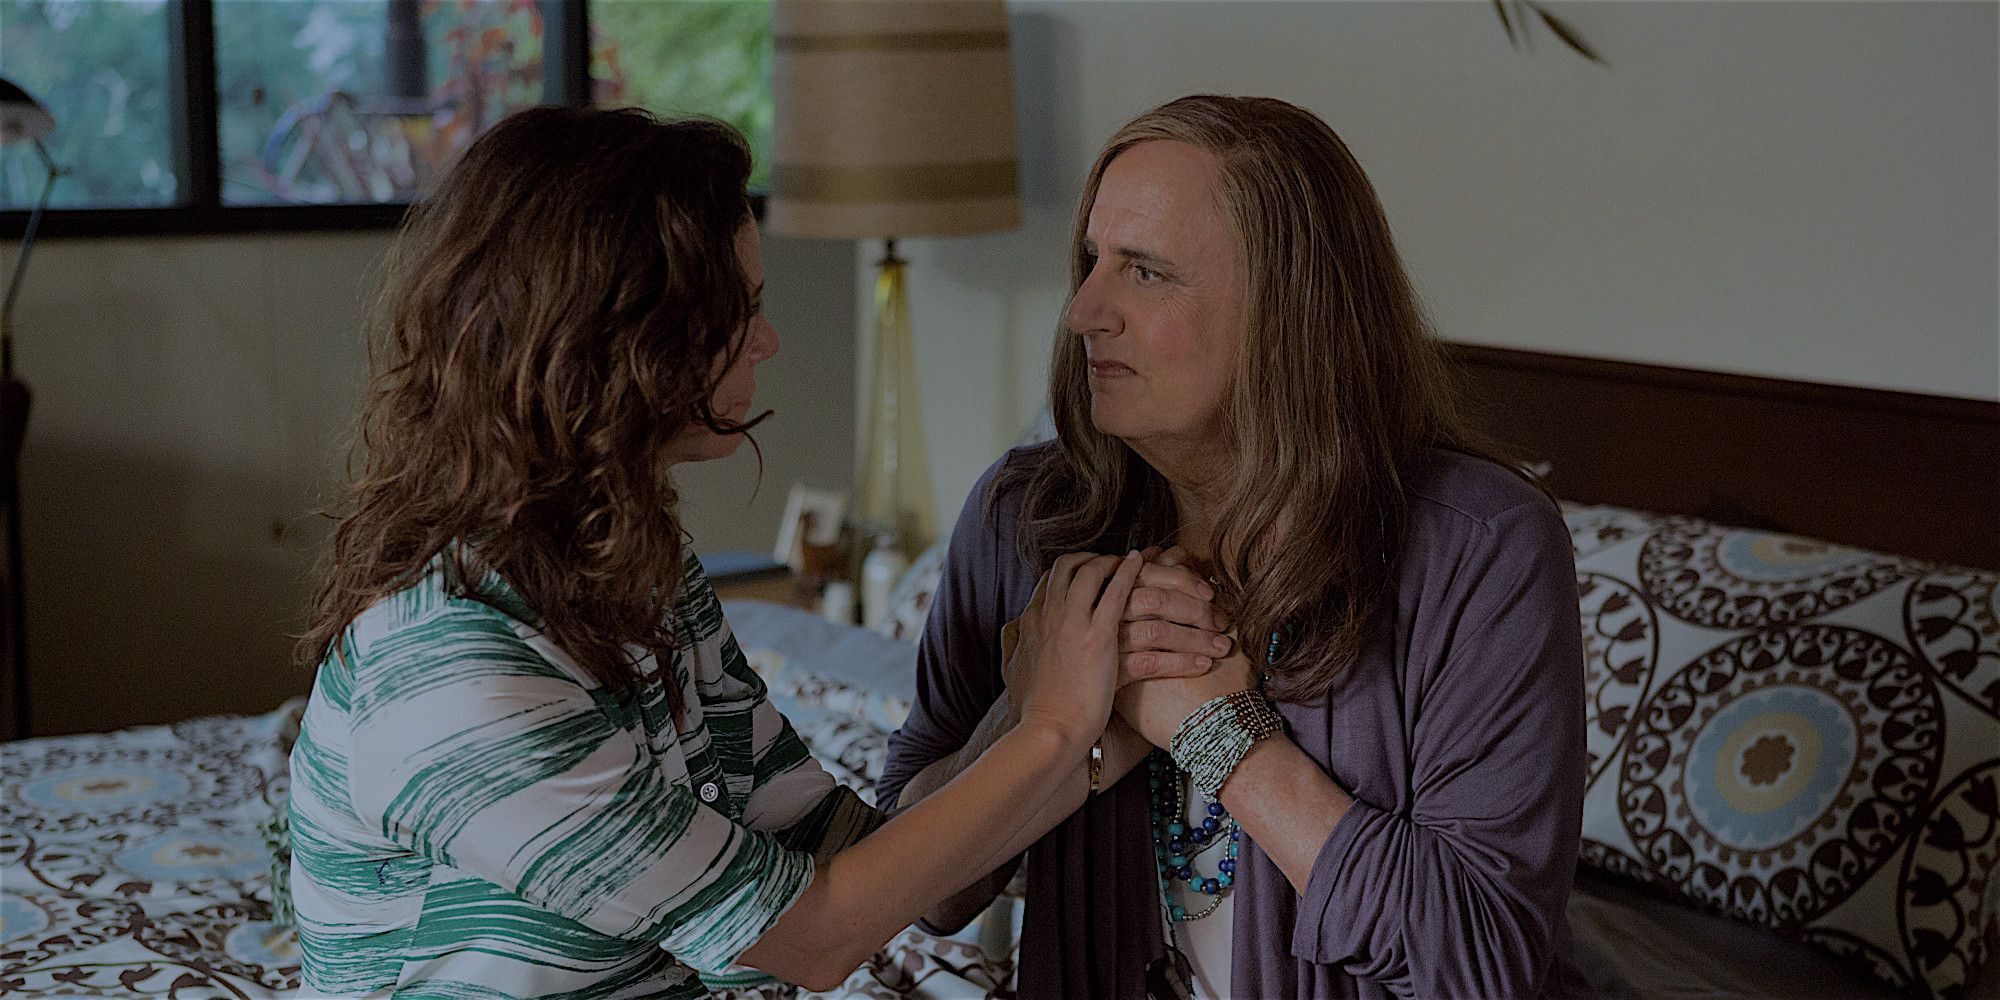 Feeling Real: On “Transparent”